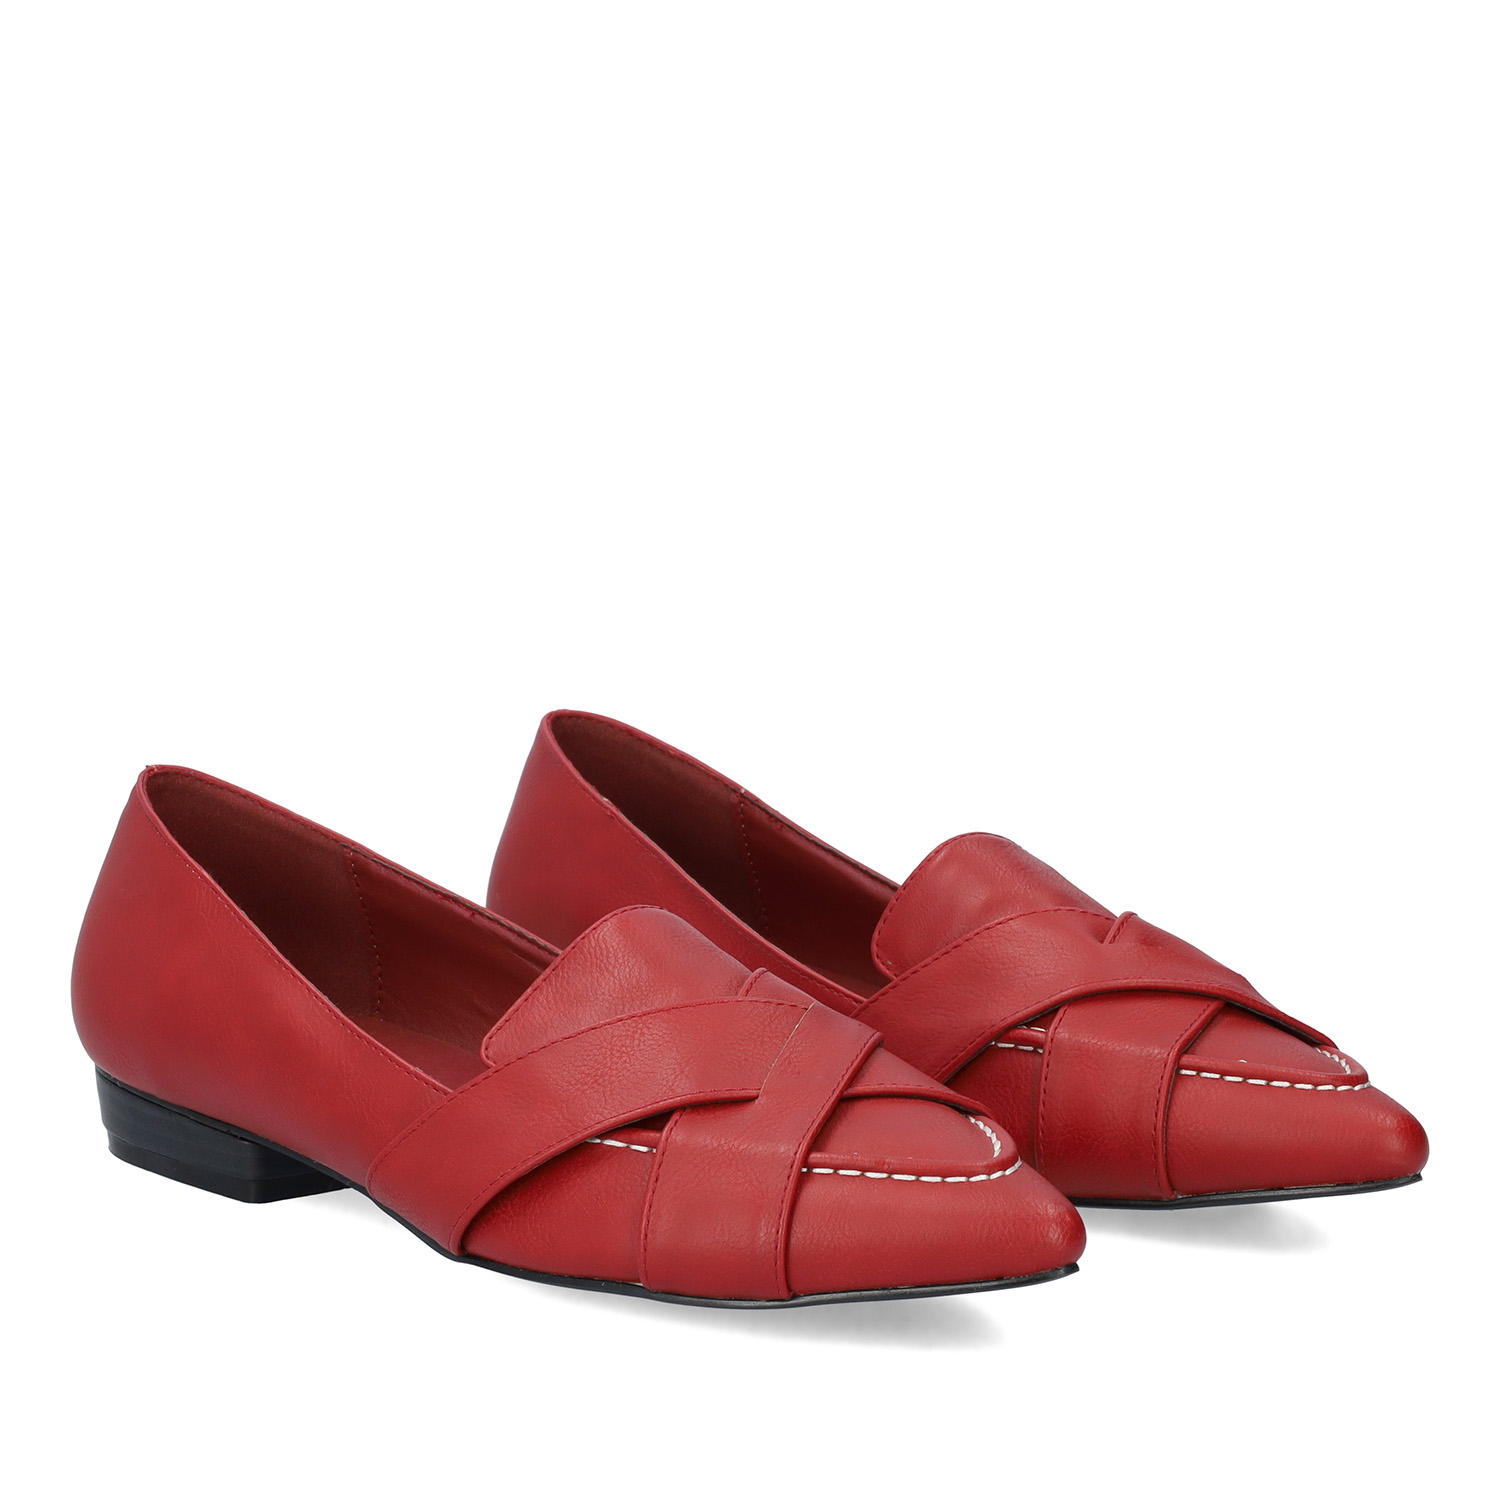 Pointed toe loafers in red faux leather 